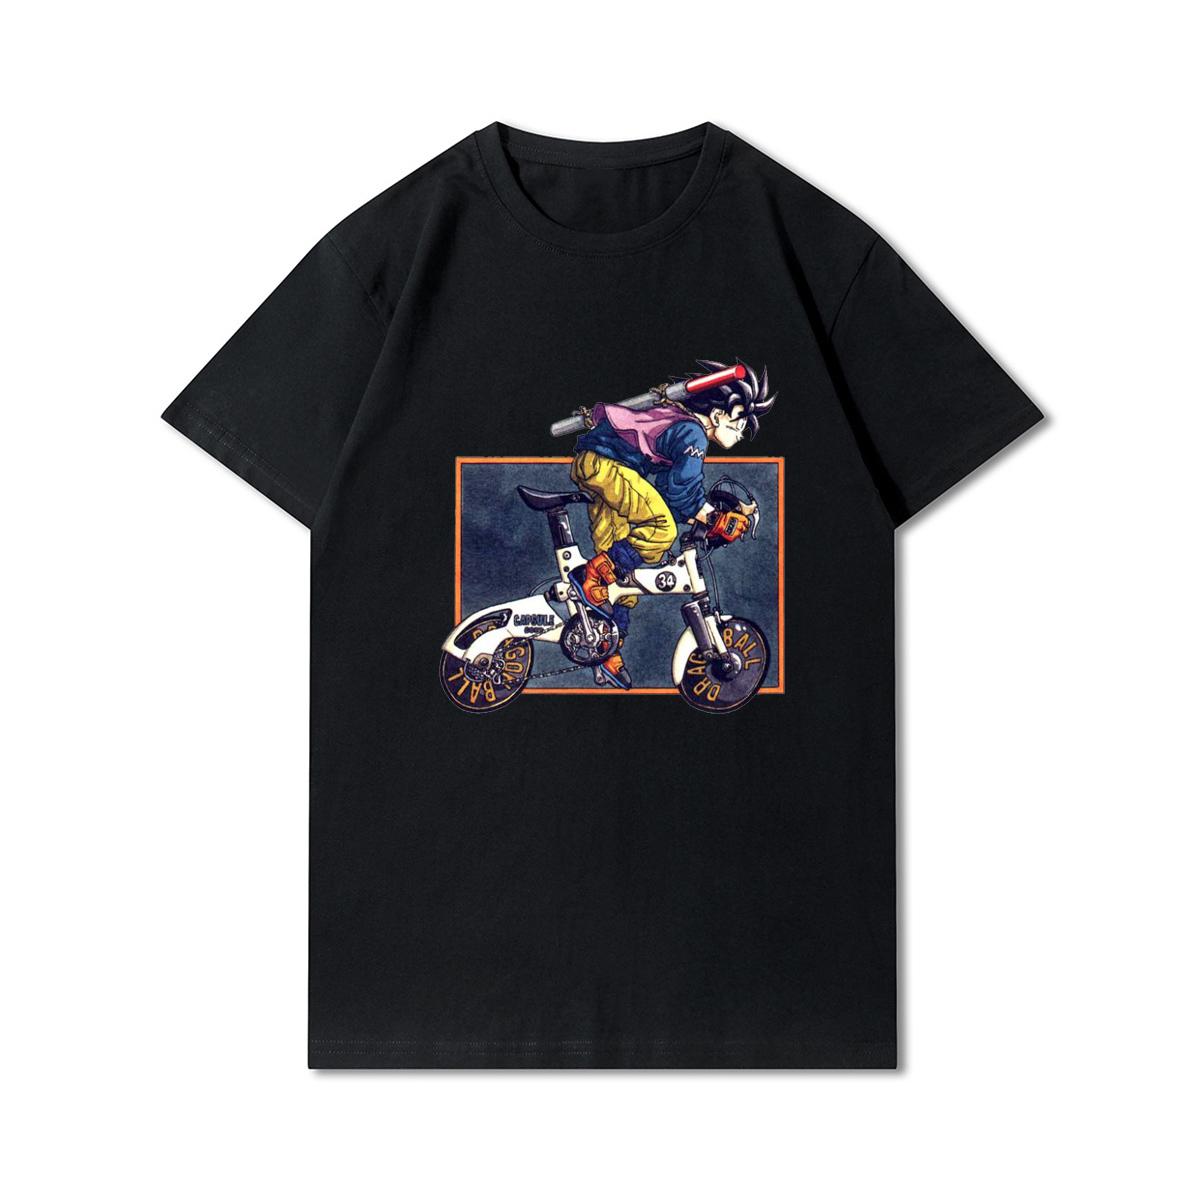 FT T Shirts Plus Size S-3XL Anime Dragon Ball Printed Men T Shirts Round Neck Cotton Tops Summer Casual Black Tees